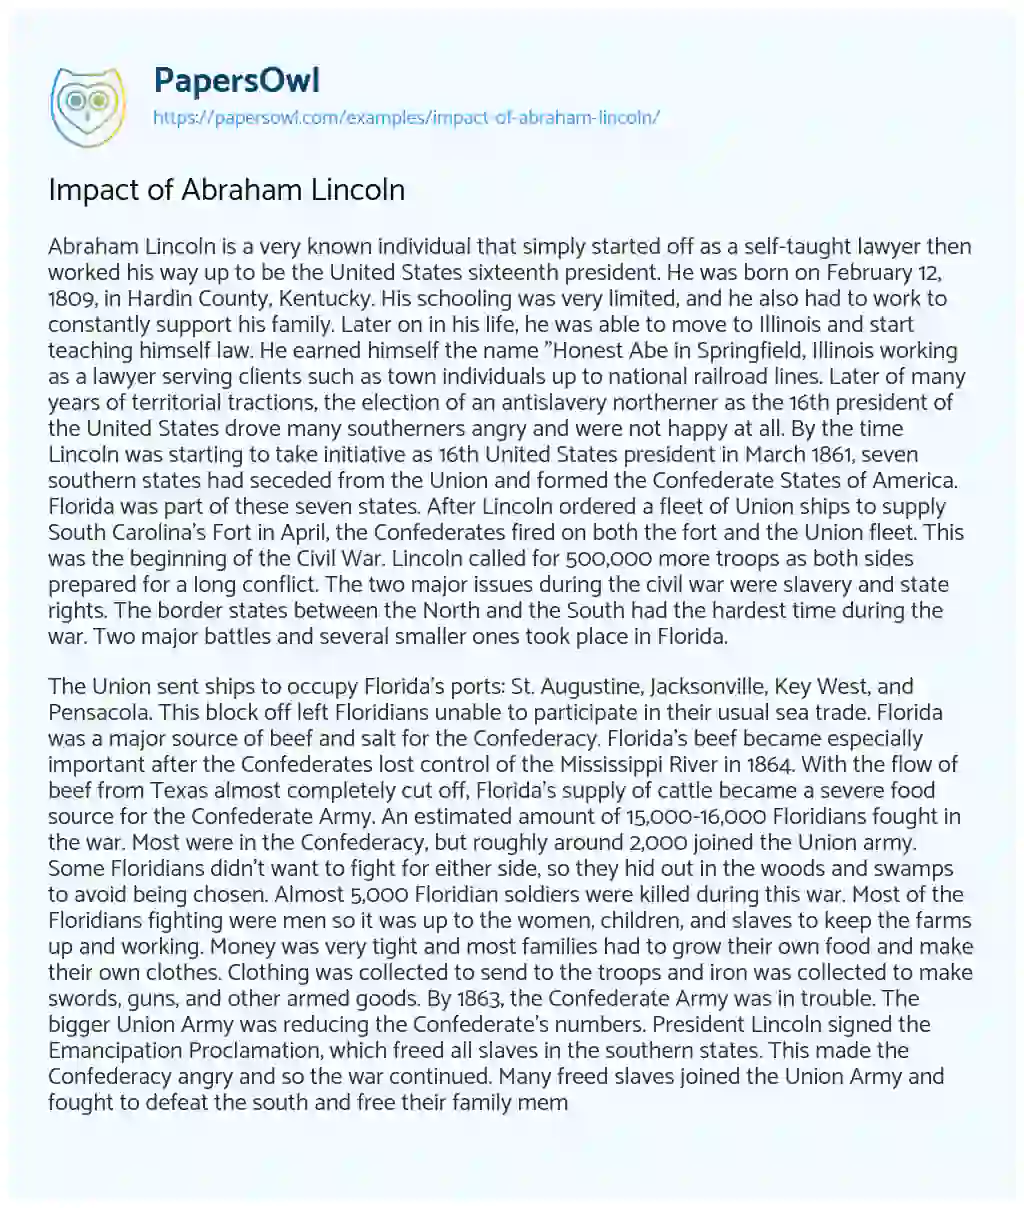 Essay on Impact of Abraham Lincoln